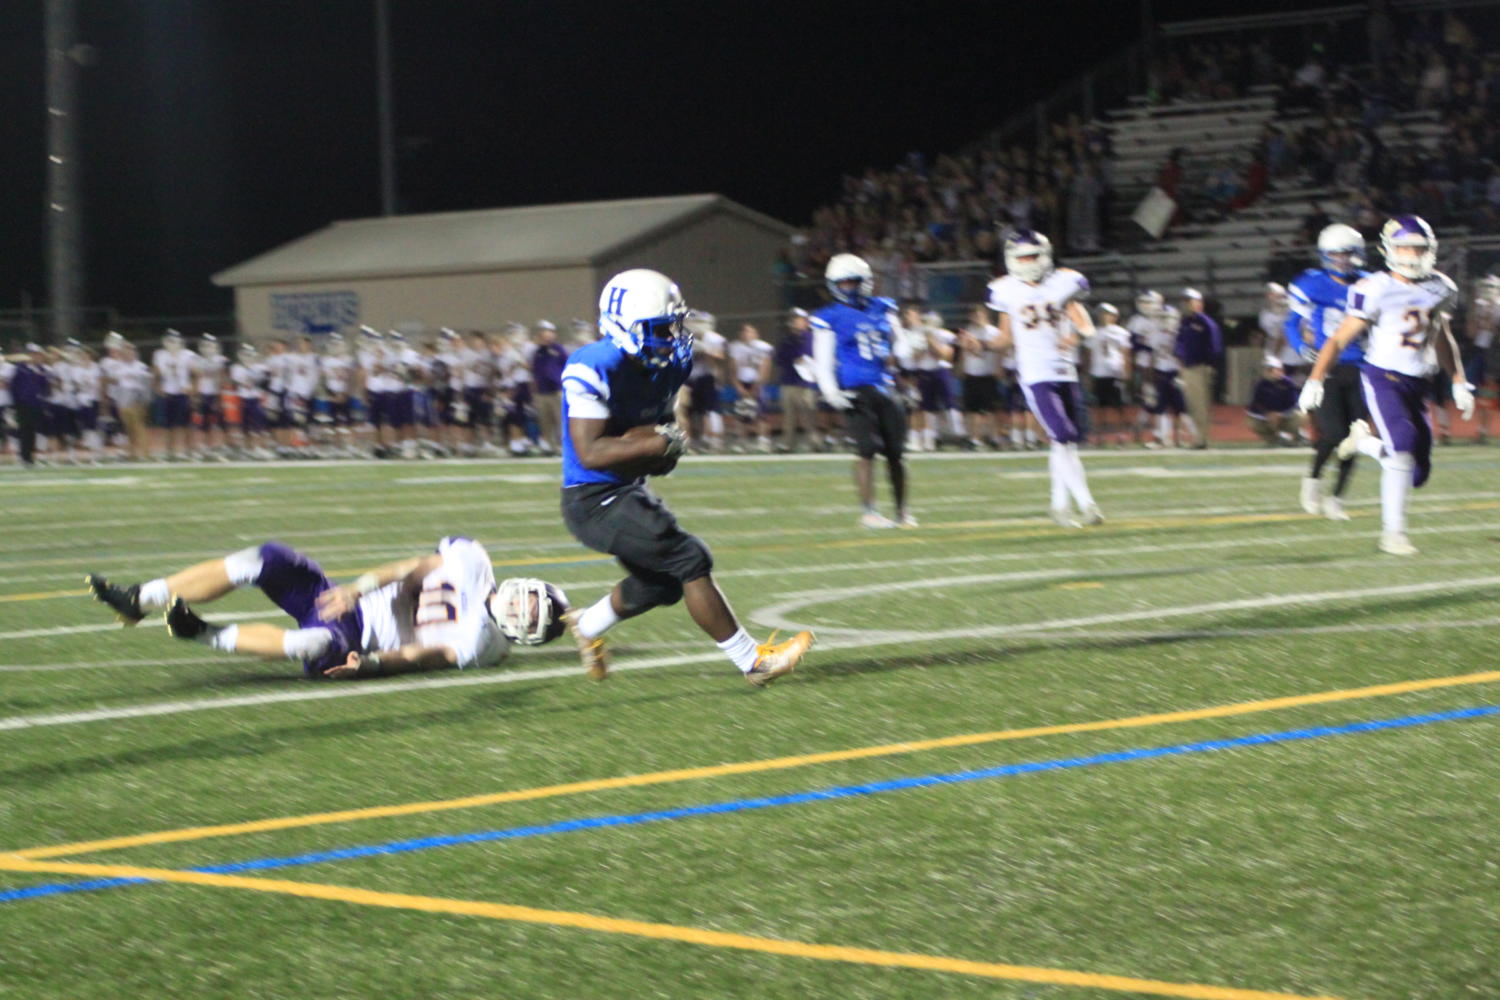 XZarion Hill, senior, dukes out defender after catch. The Royals lost to the Wildcats. 